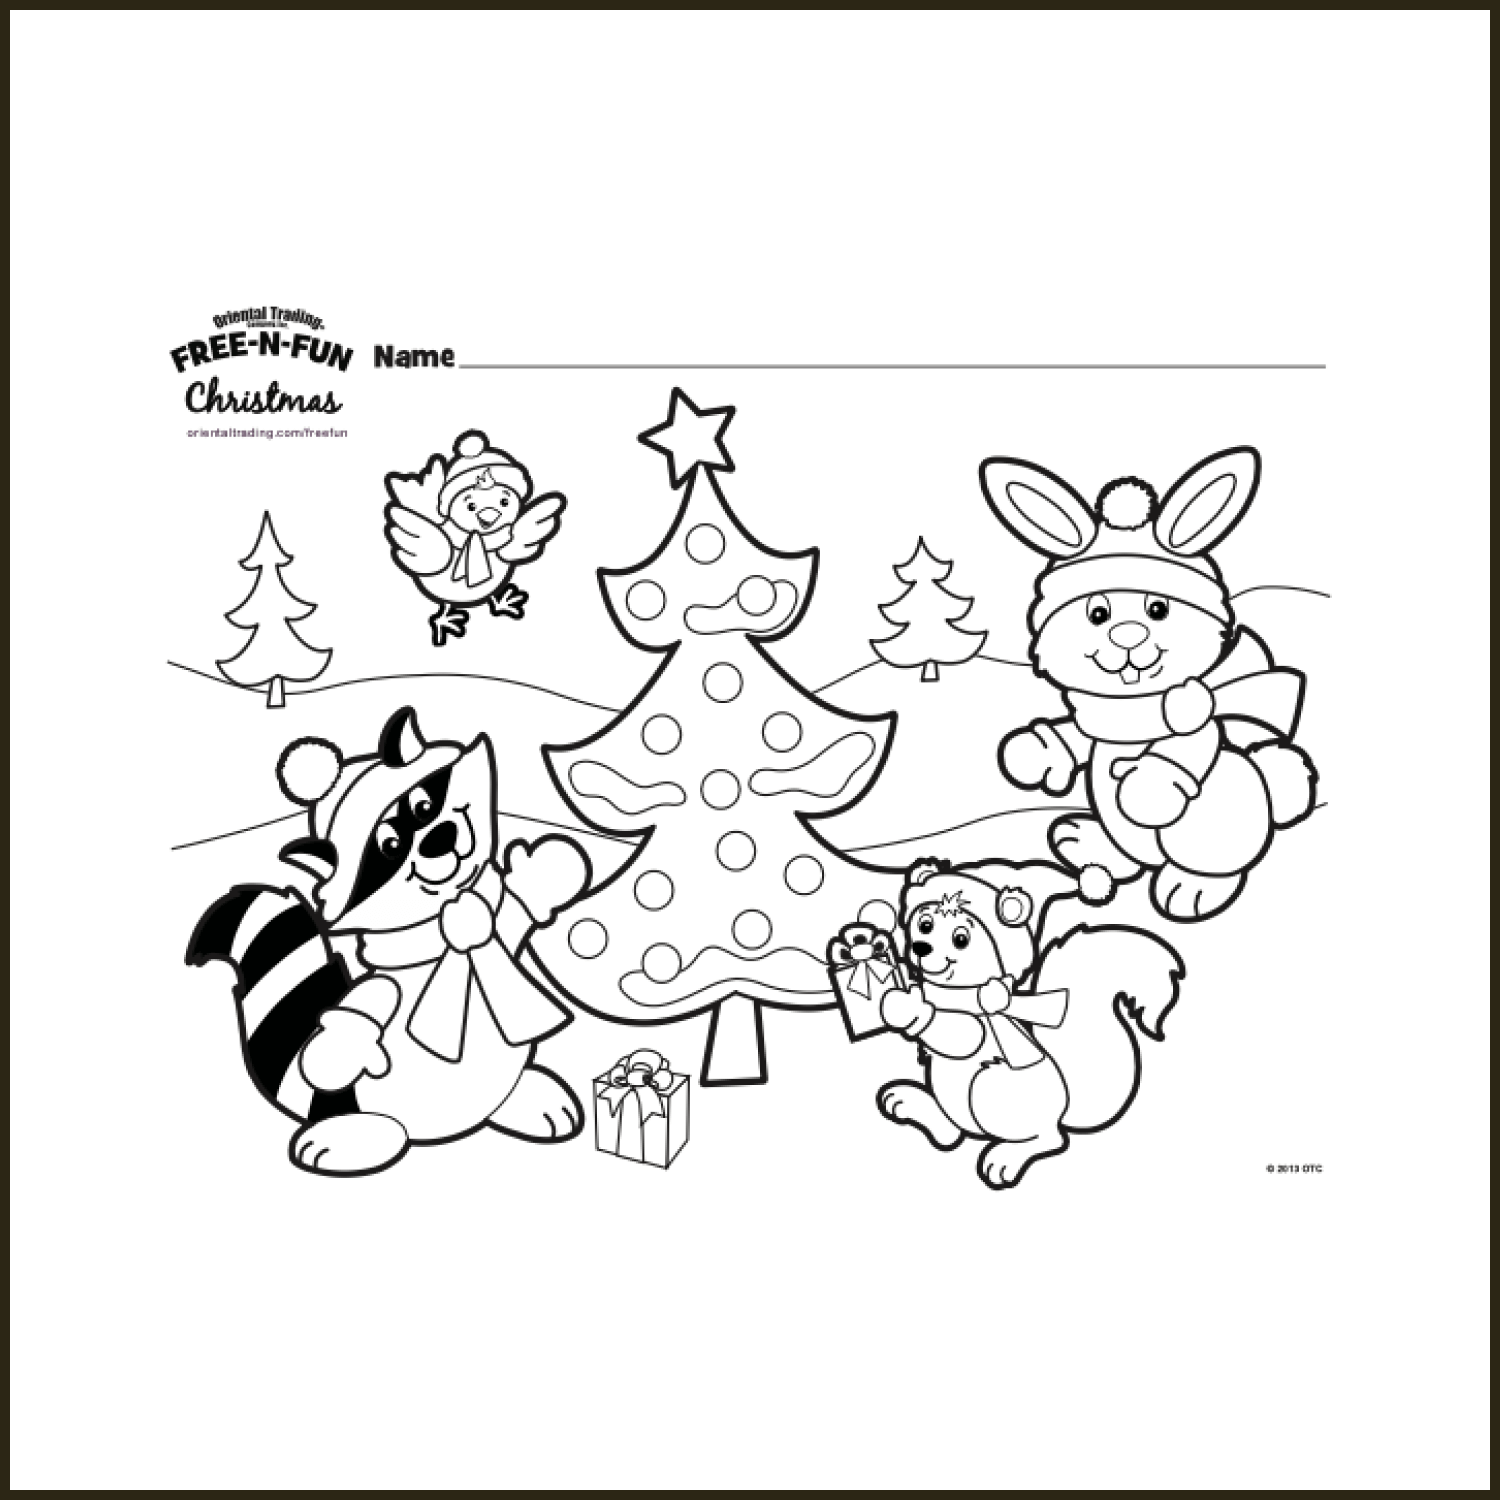 Holiday scene coloring page cover image.